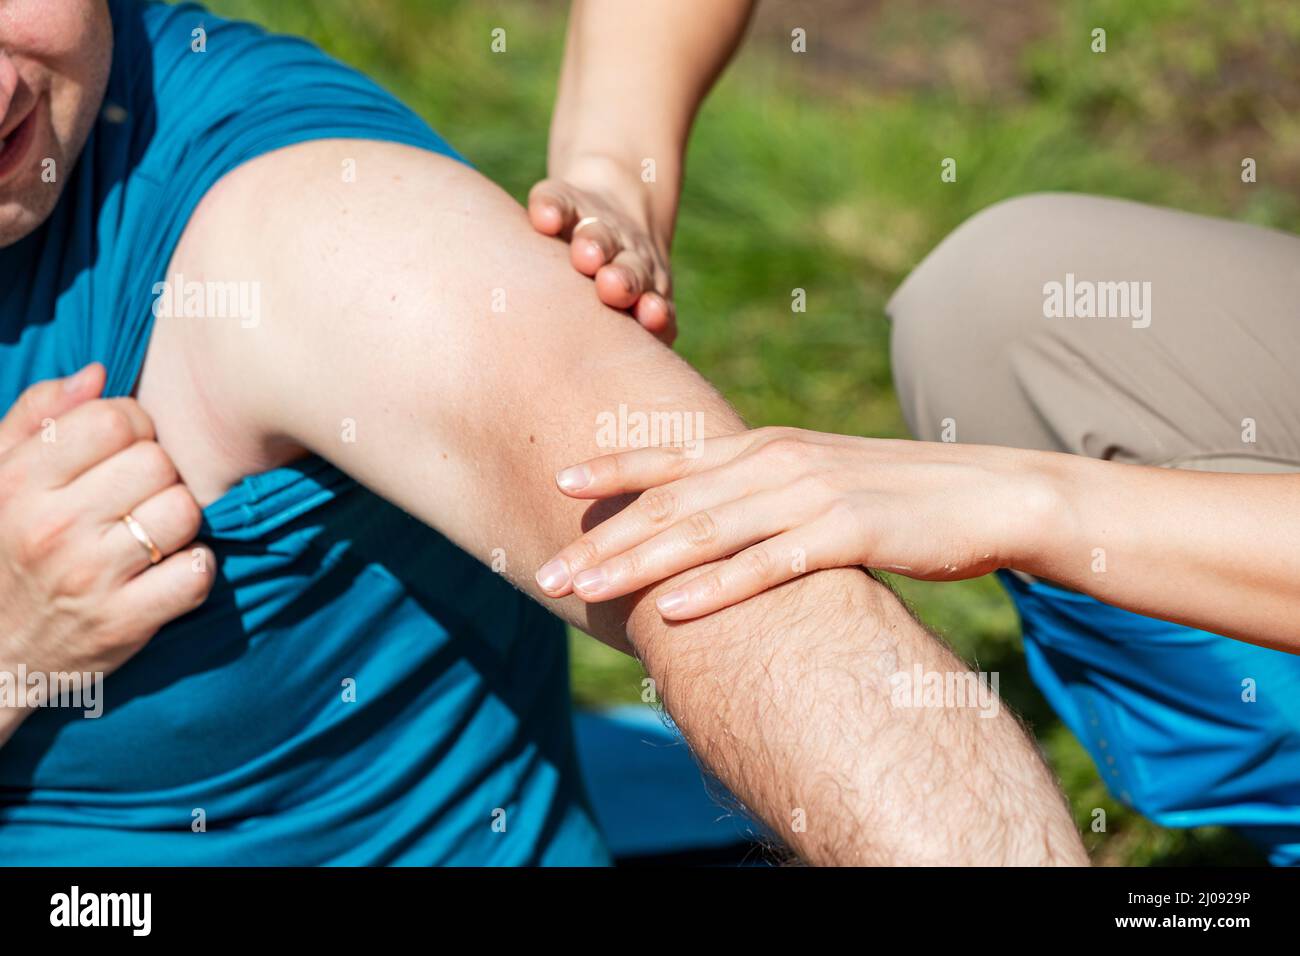 A man on a hike got an injury to the elbow or shoulder joint and his partner does a massage and provides first aid Stock Photo